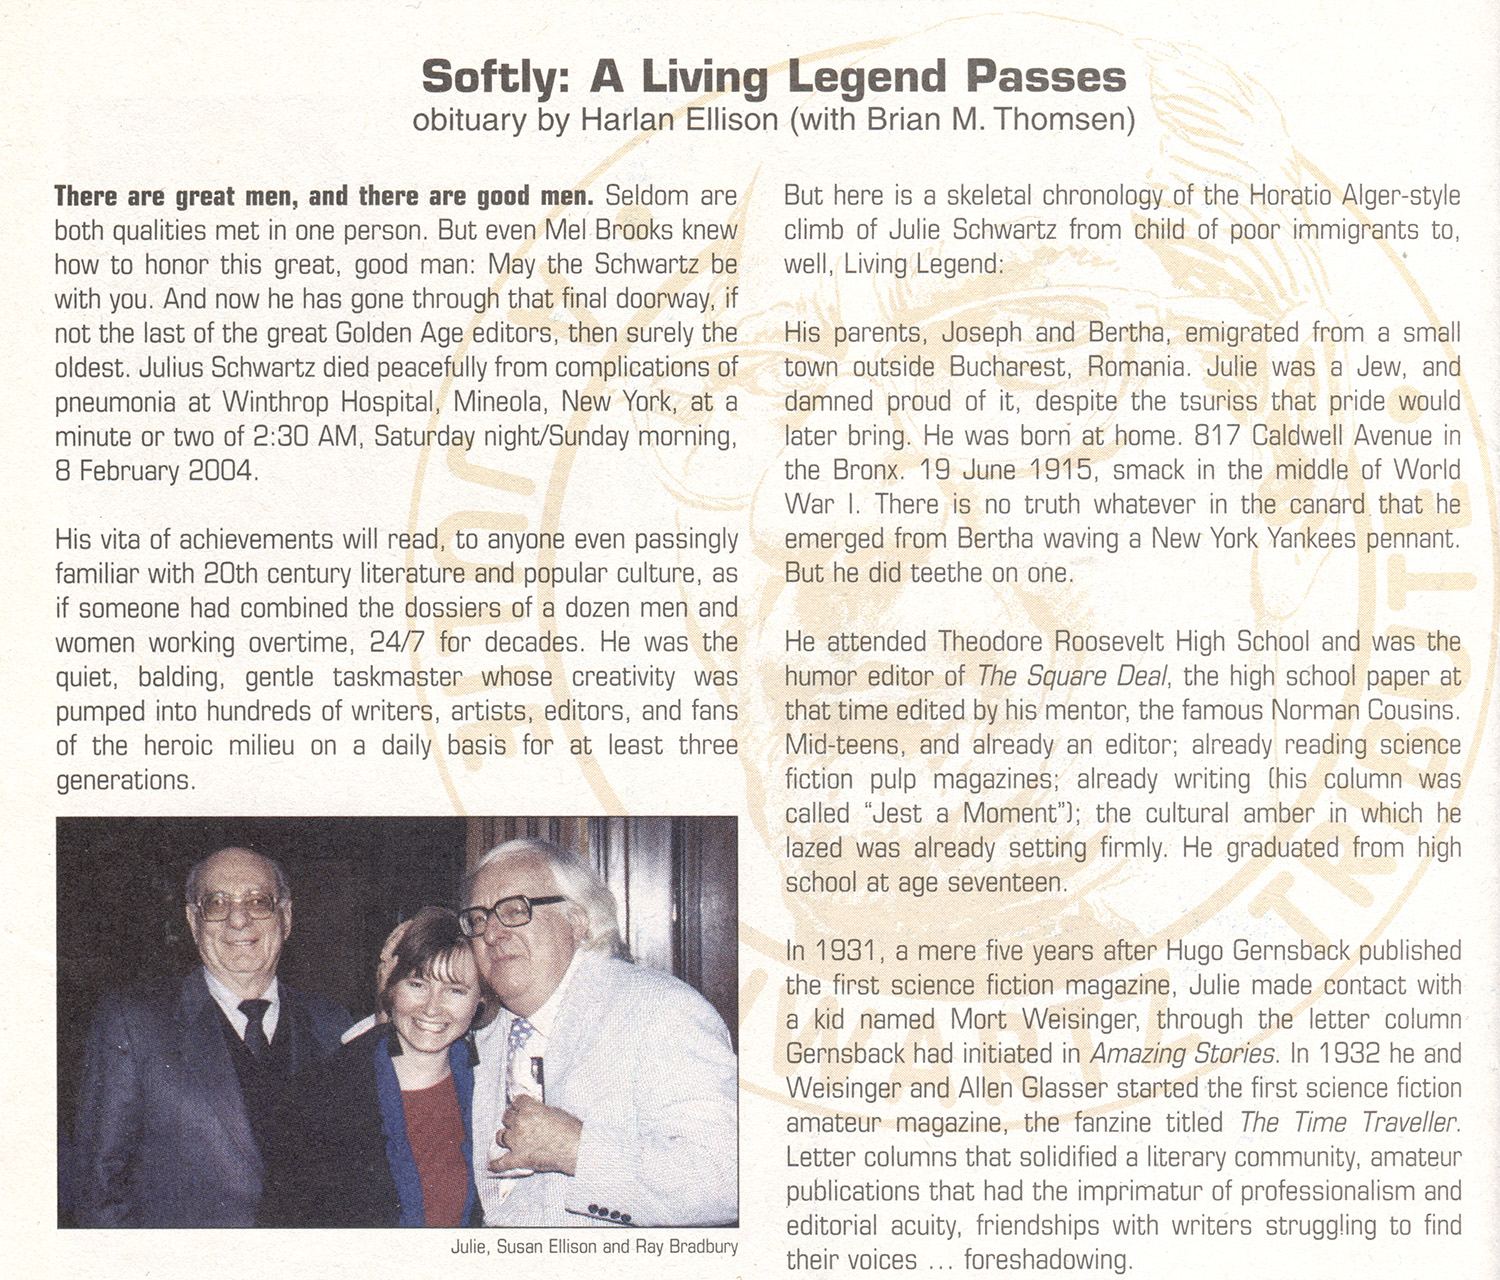 Softly: A Legend Passes from DC Comics Presents: Hawkman